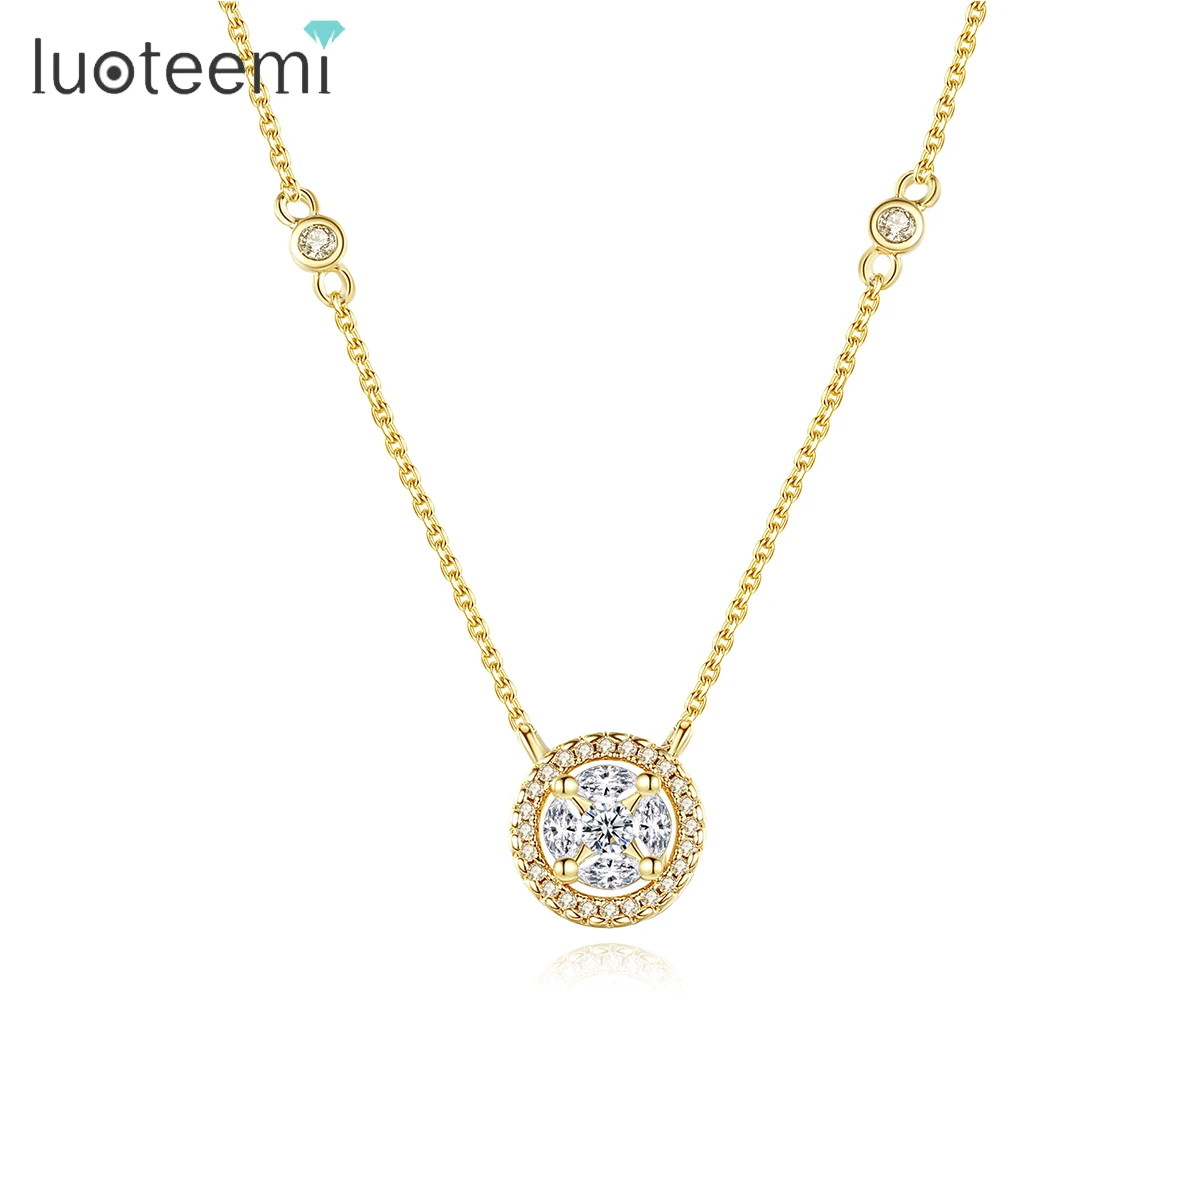 LUOTEEMI Trendy Dainty Chains Necklace Cubic Zircon Womens Necklaces 202118K Gold Plated Charm Pendant (1600274187553)